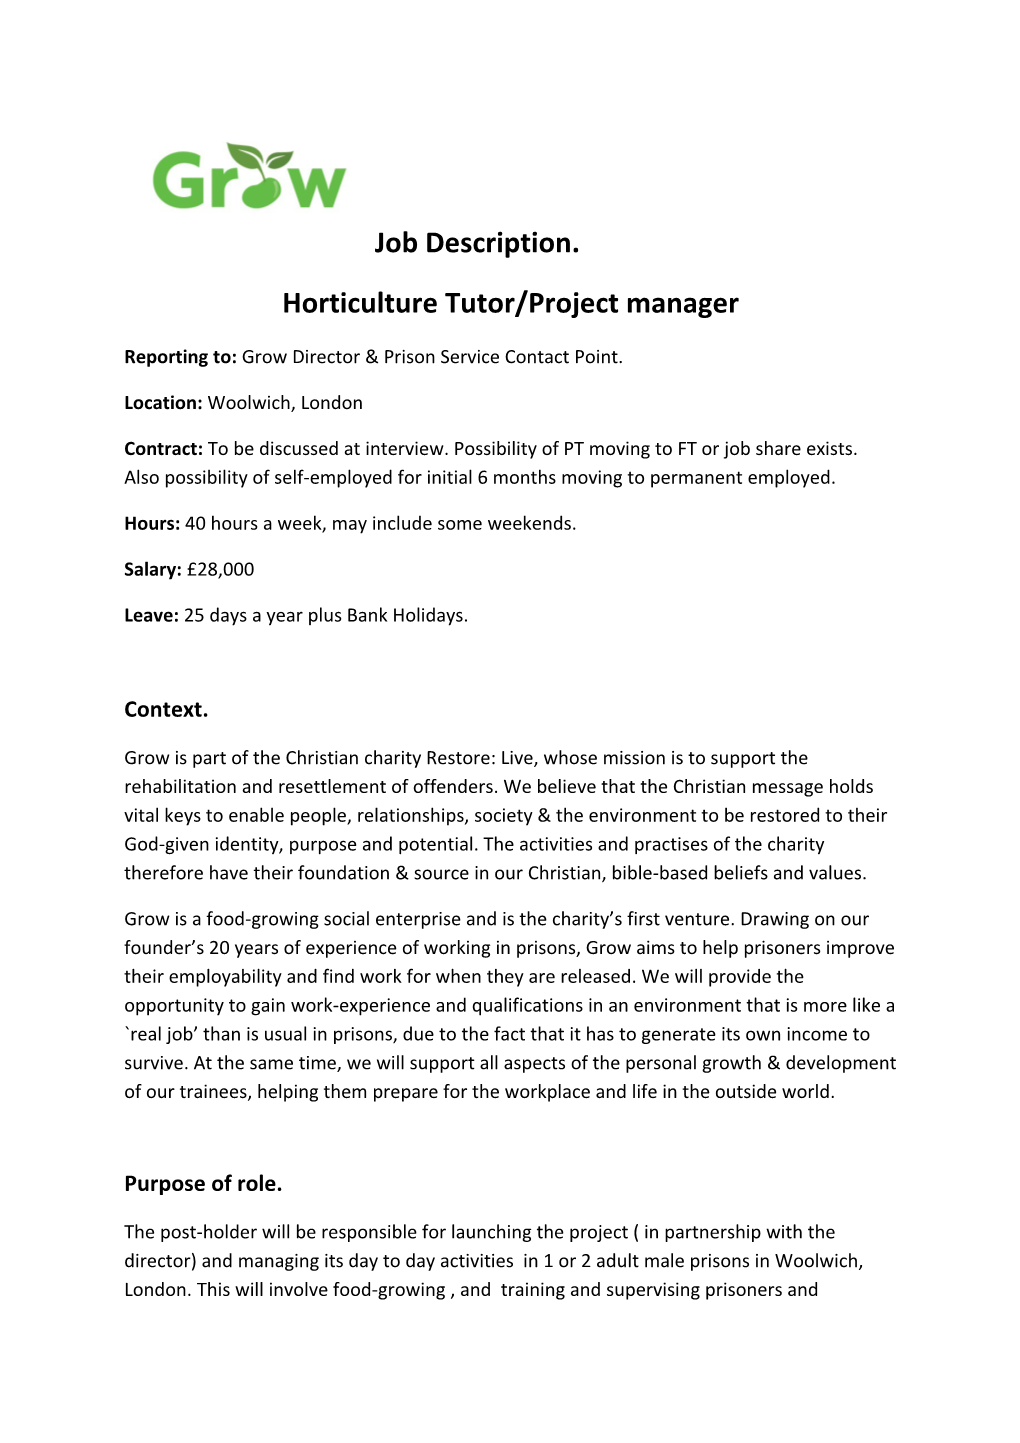 Horticulture Tutor/Project Manager